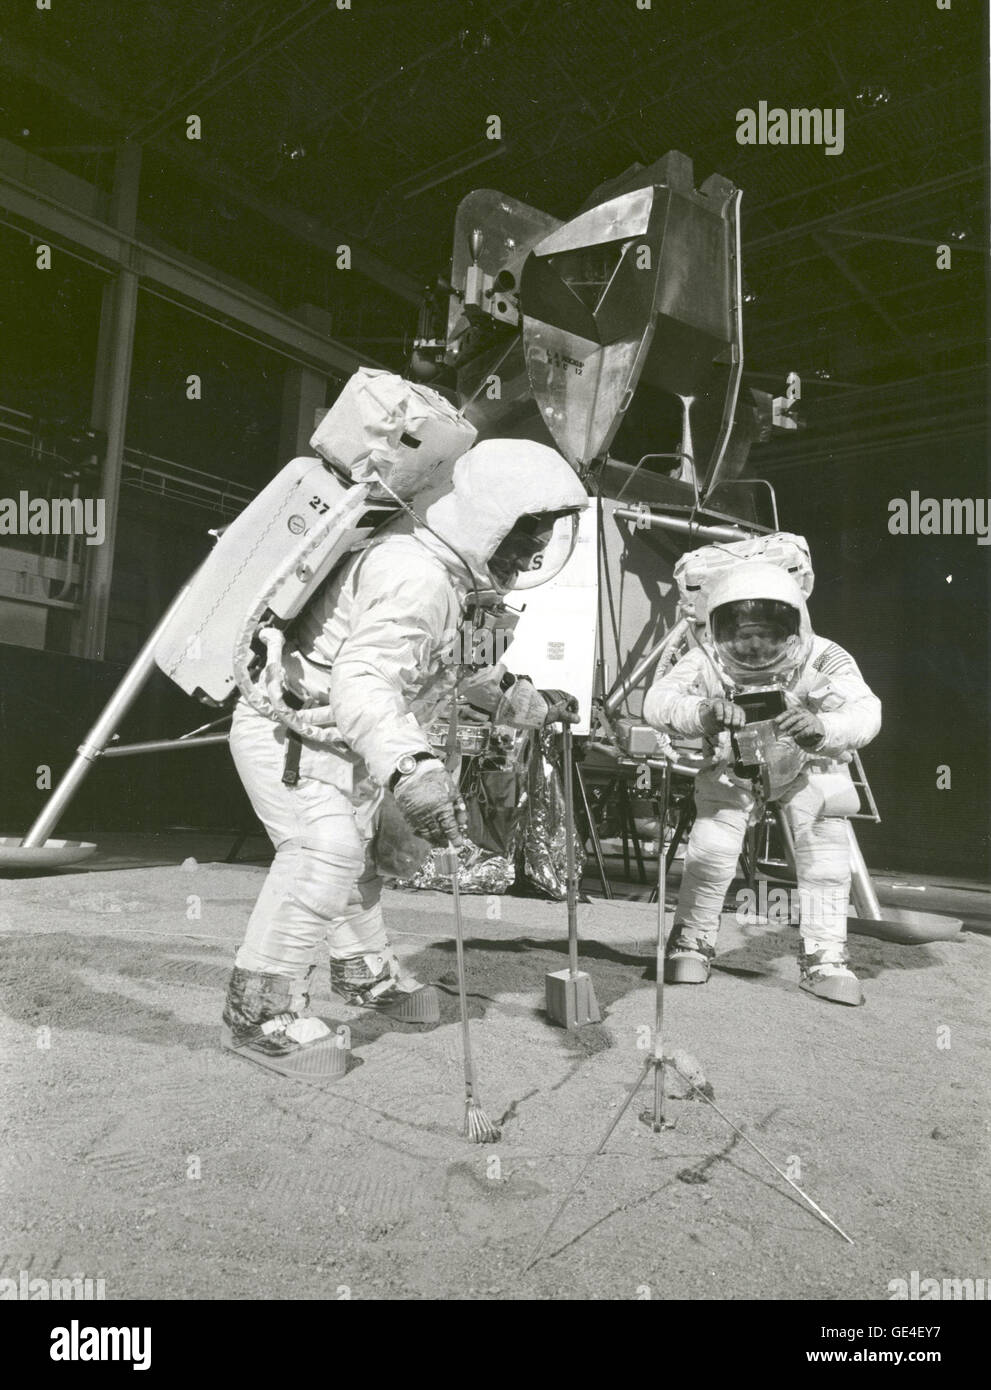 The Apollo 11 crew simulates deploying and using lunar tools on the surface of the Moon during a training exercise on April 22, 1969. Astronaut Buzz (Aldrin Jr. on left), lunar module pilot, uses a scoop and tongs to pick up a soil sample. Astronaut Neil A. Armstrong, Apollo 11 commander, holds a bag to receive the sample. In the background is a Lunar Module mockup.  Image # : S-69-32233  Date: April 22, 1969 Stock Photo